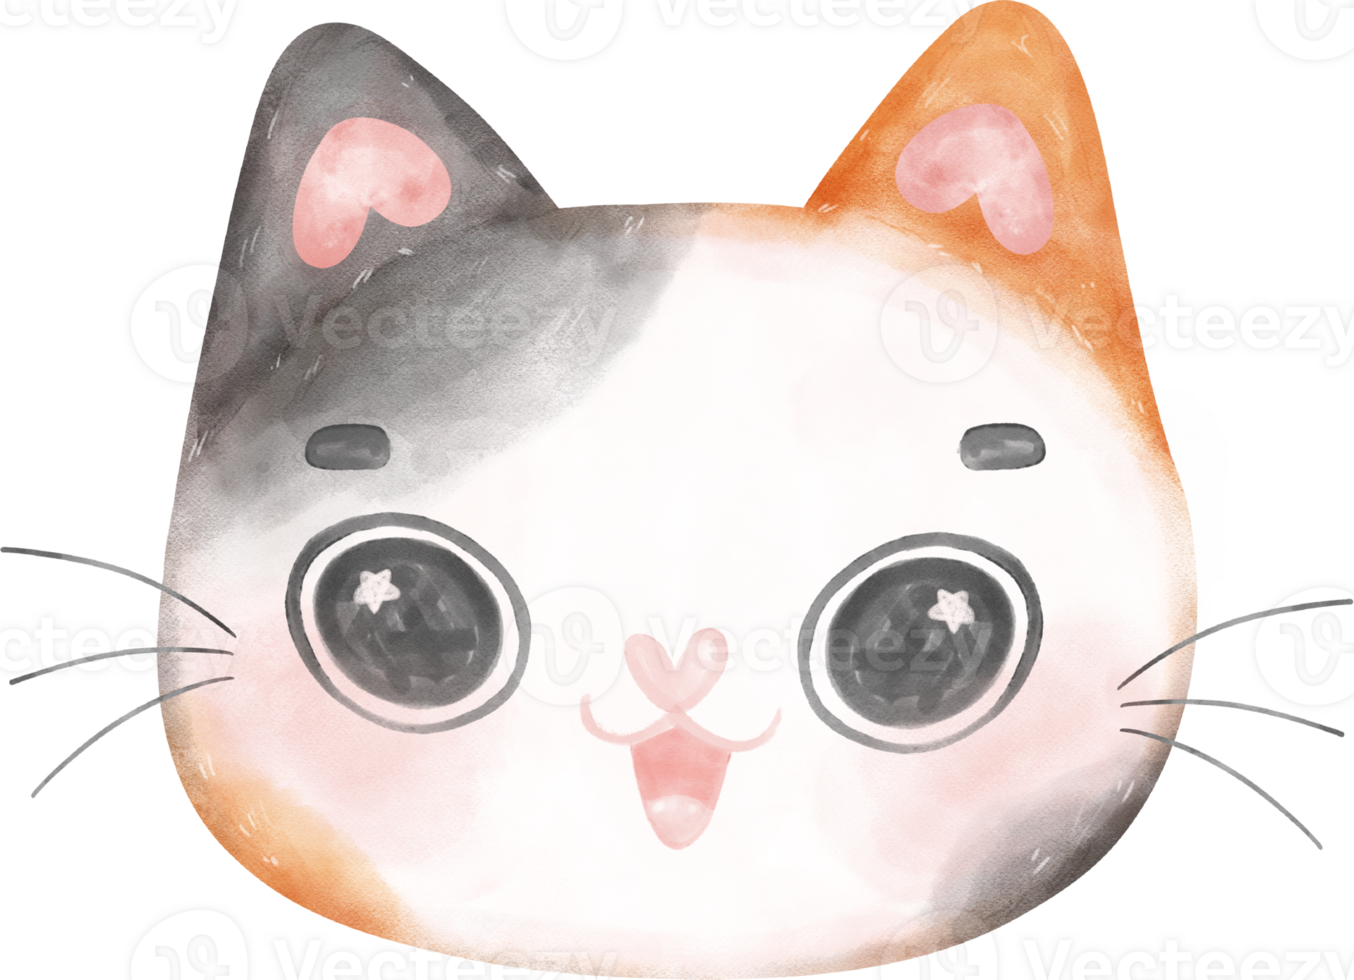 Cute cheerful calico kitten cat happy face cartoon character watercolour hand drawing png